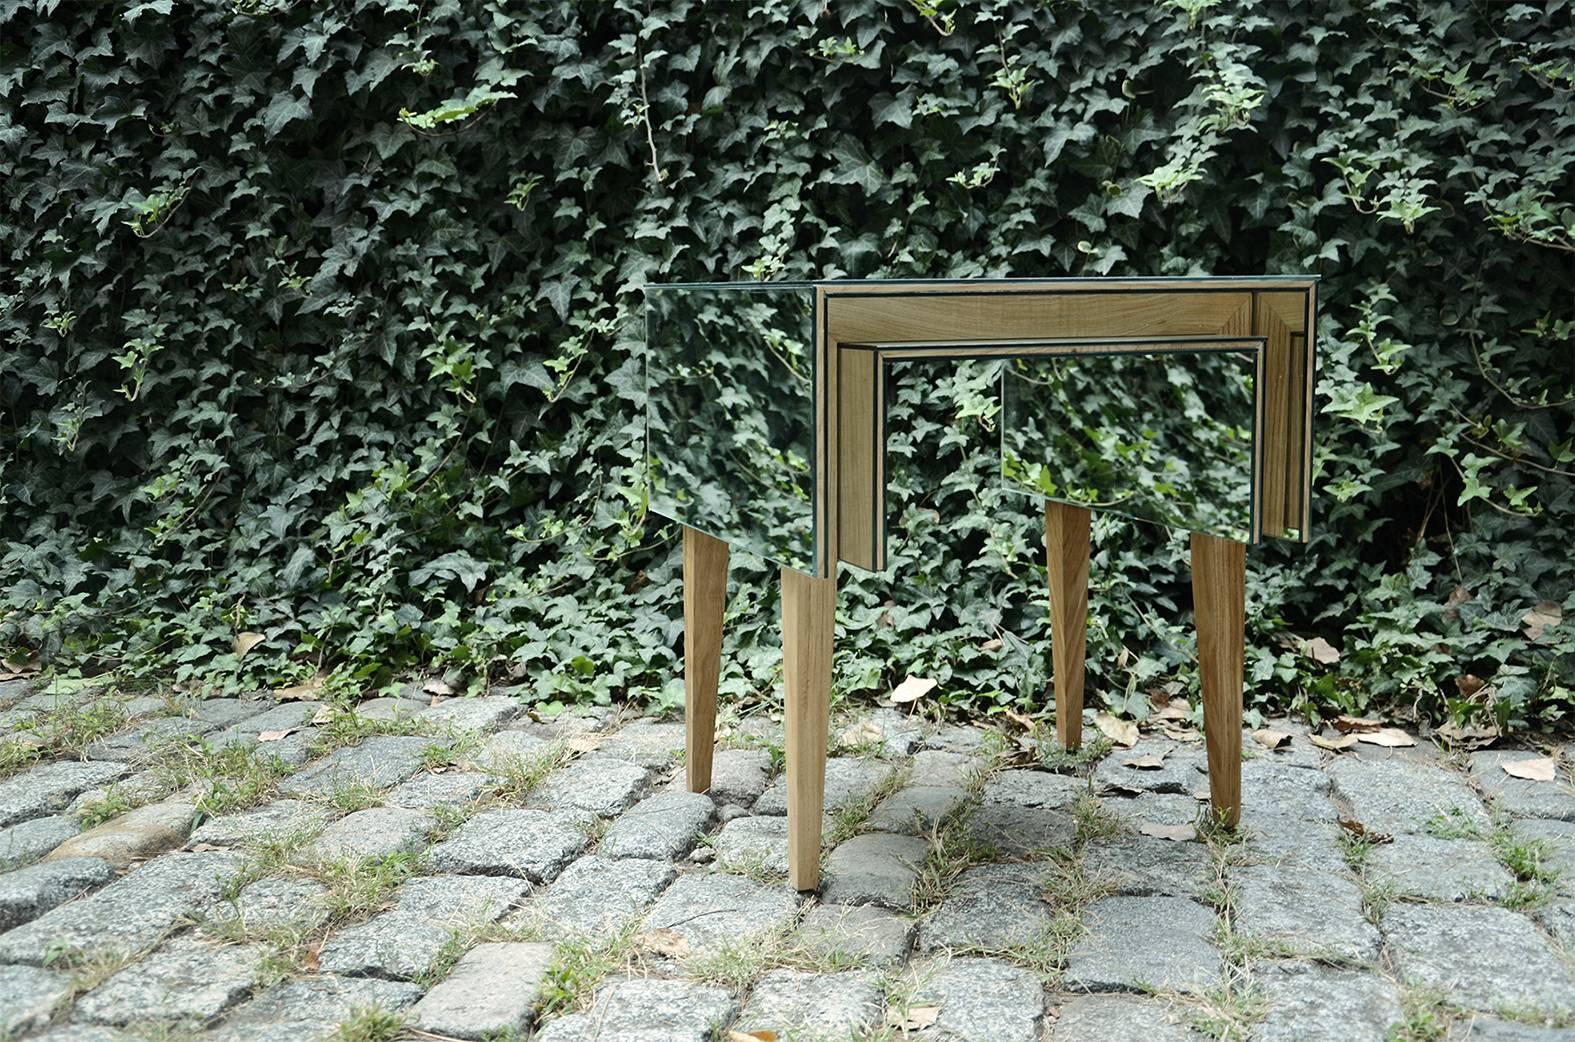 Dimensions: L 92cm, W 52cm, 60cm
Materials: Wood/mirror

Invisible table:
Invisible table by Rooms, blend mysterious with the simple. Using mirror and wood, these delicate tables act like a chameleons vanishing into the surroundings and appear